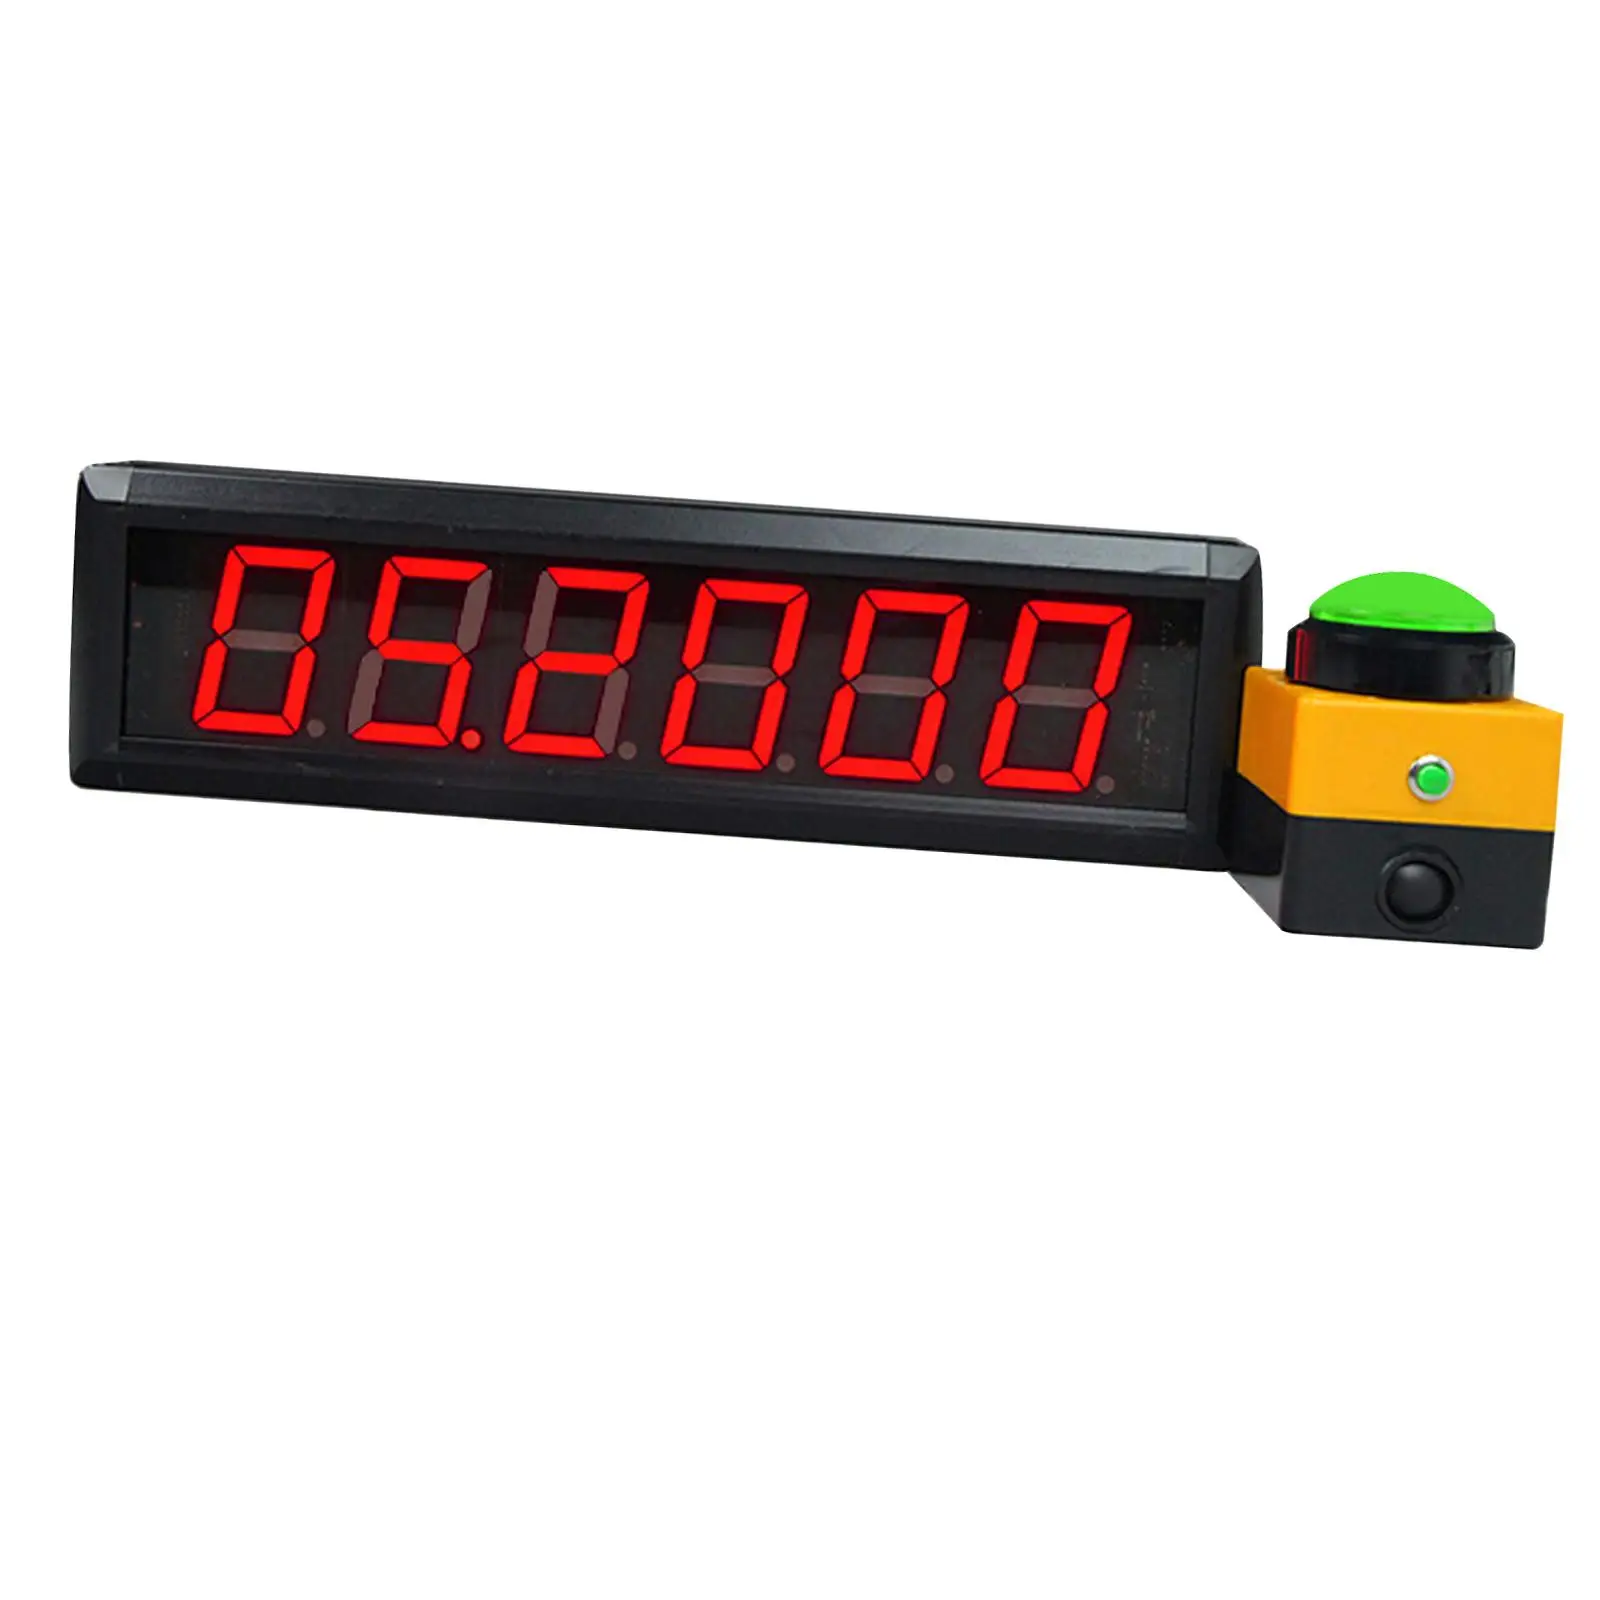 Digital Timer Compact Size LED Display for Home Promotional Activities Gym